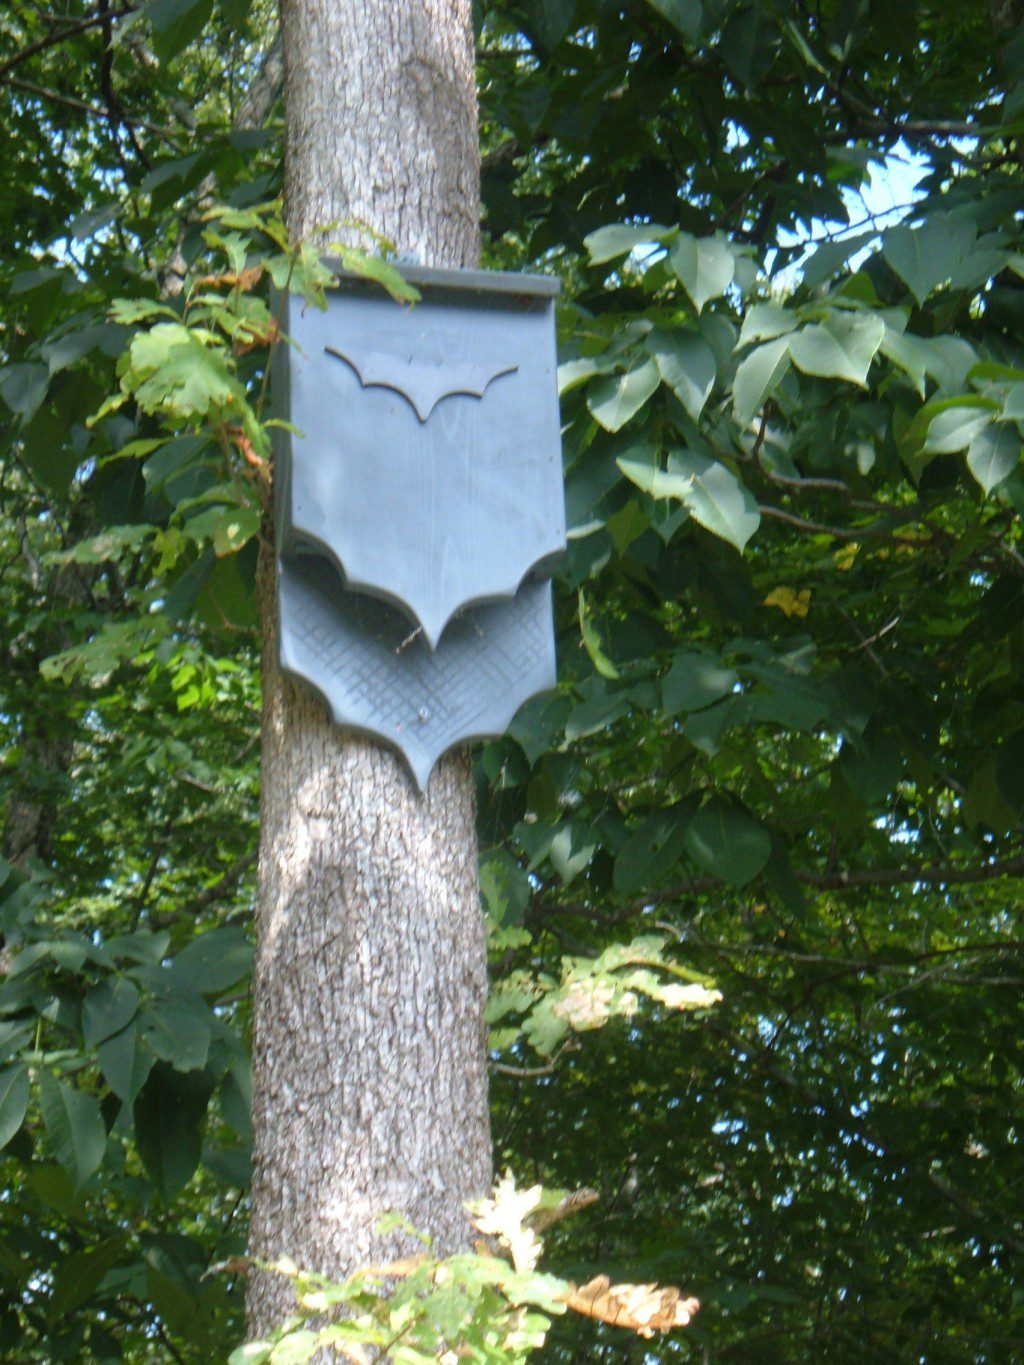 Buy or Build A Bat House to Attract Garden Pest Control